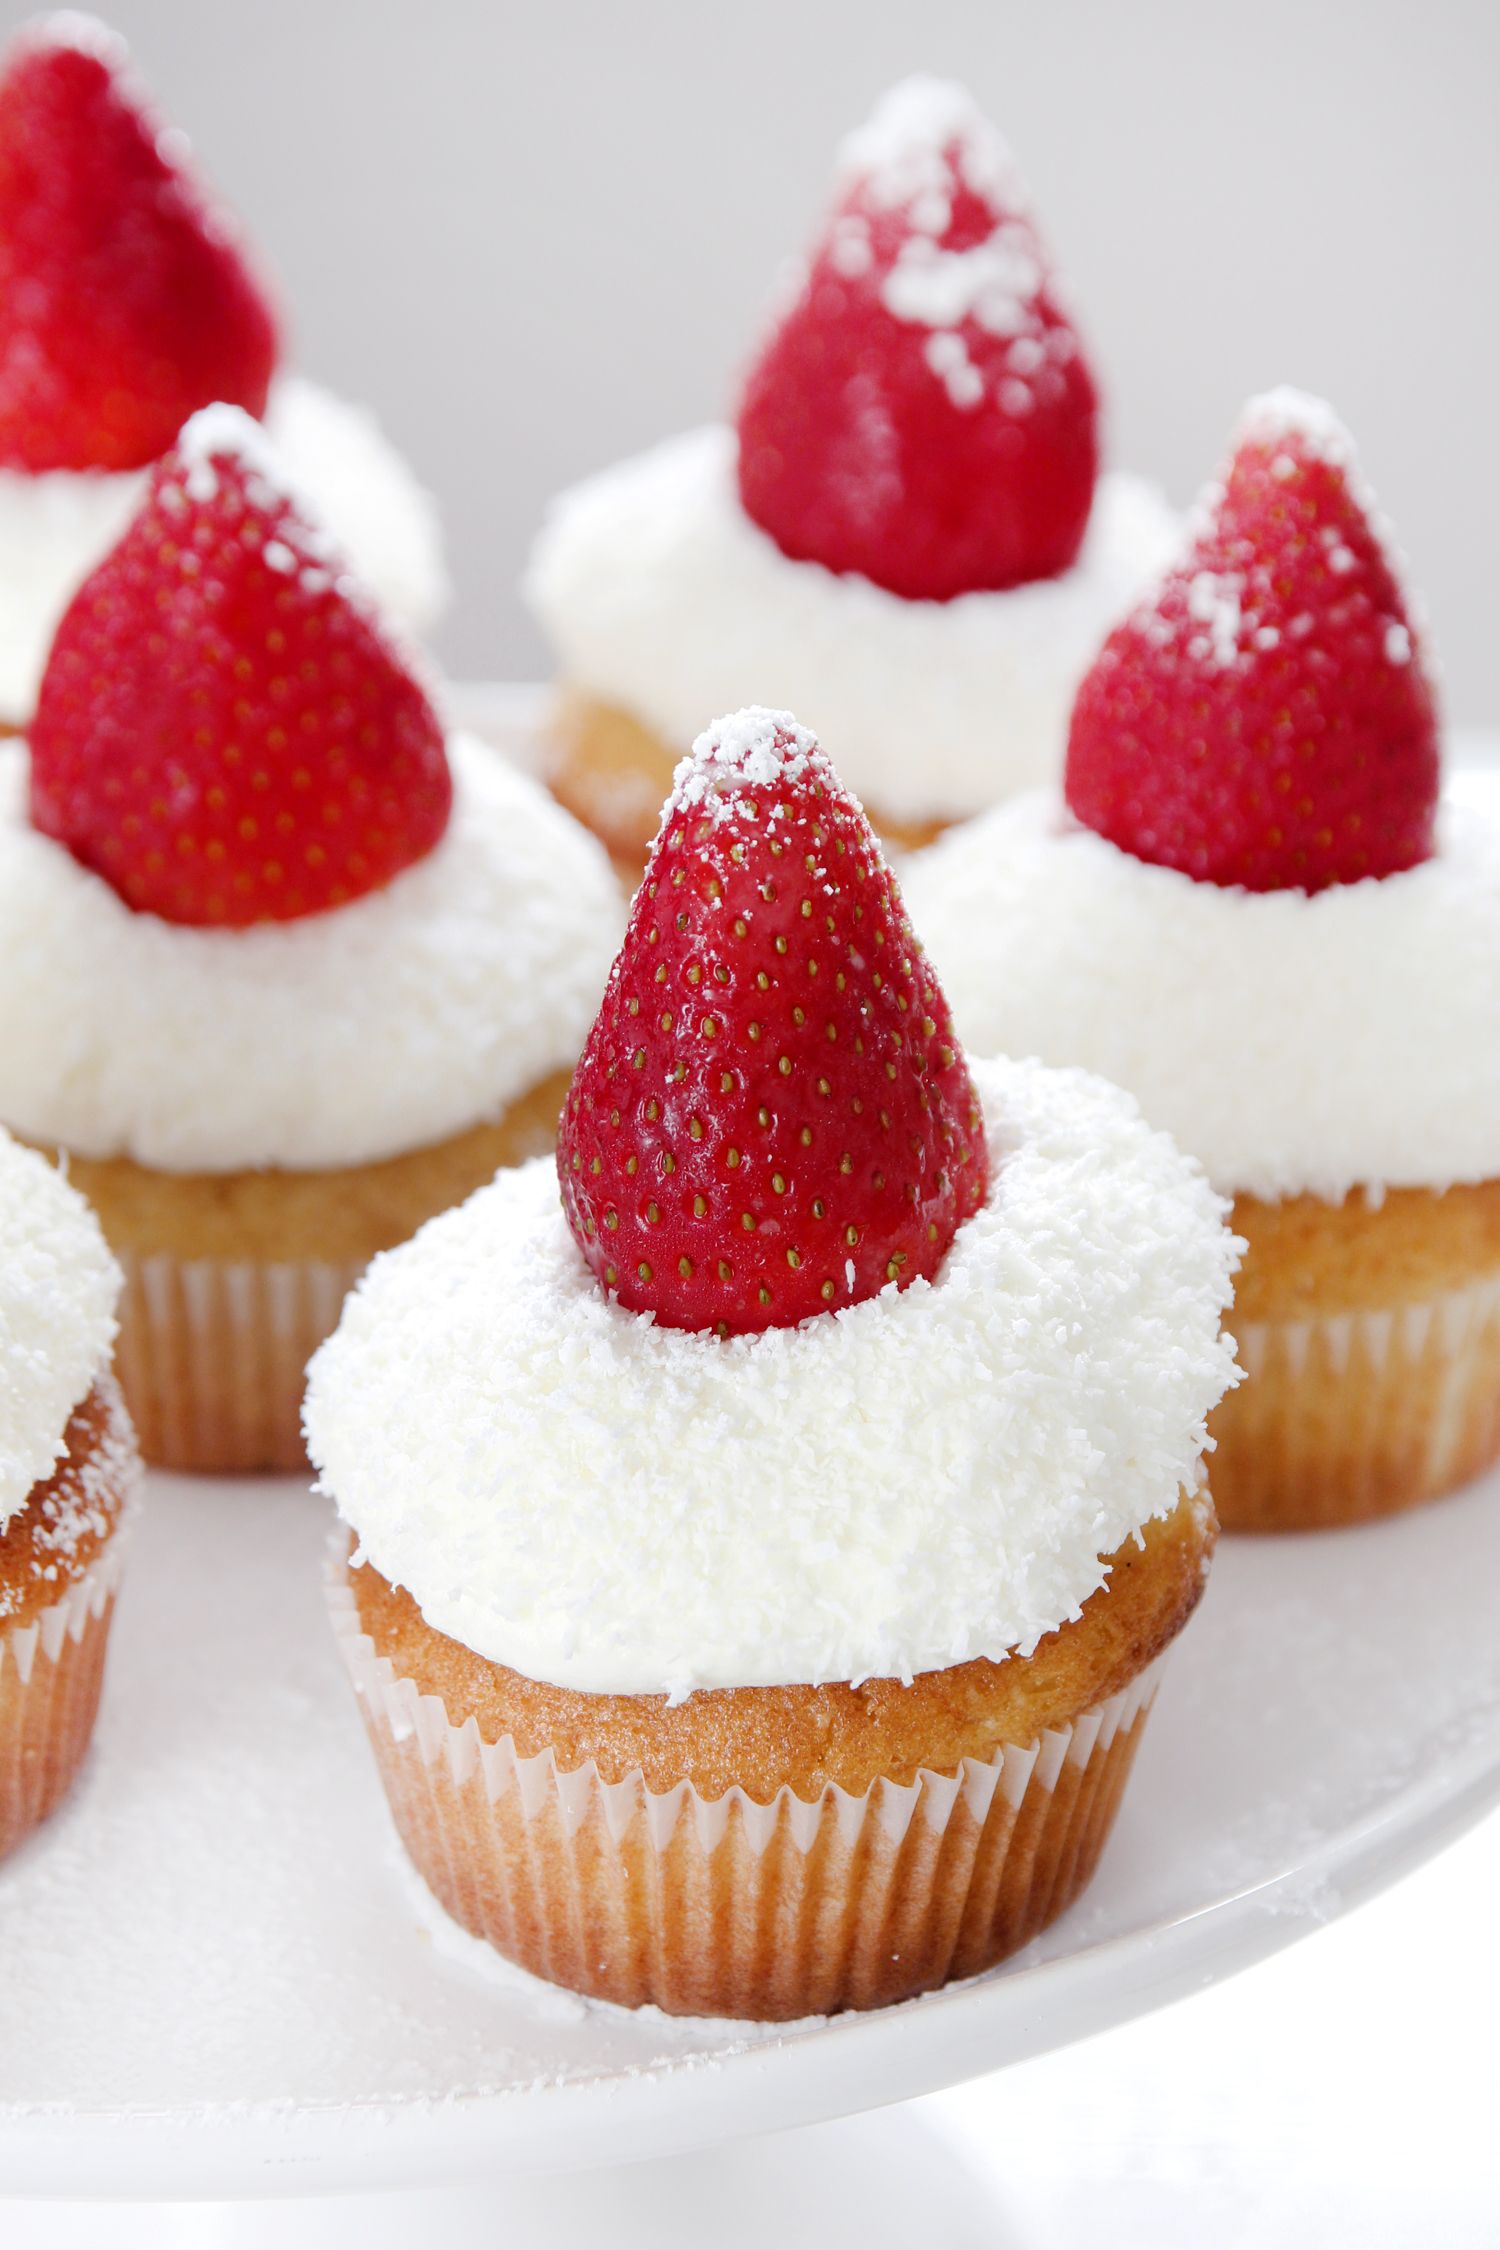 Strawberry Cupcakes with White Chocolate Frosting